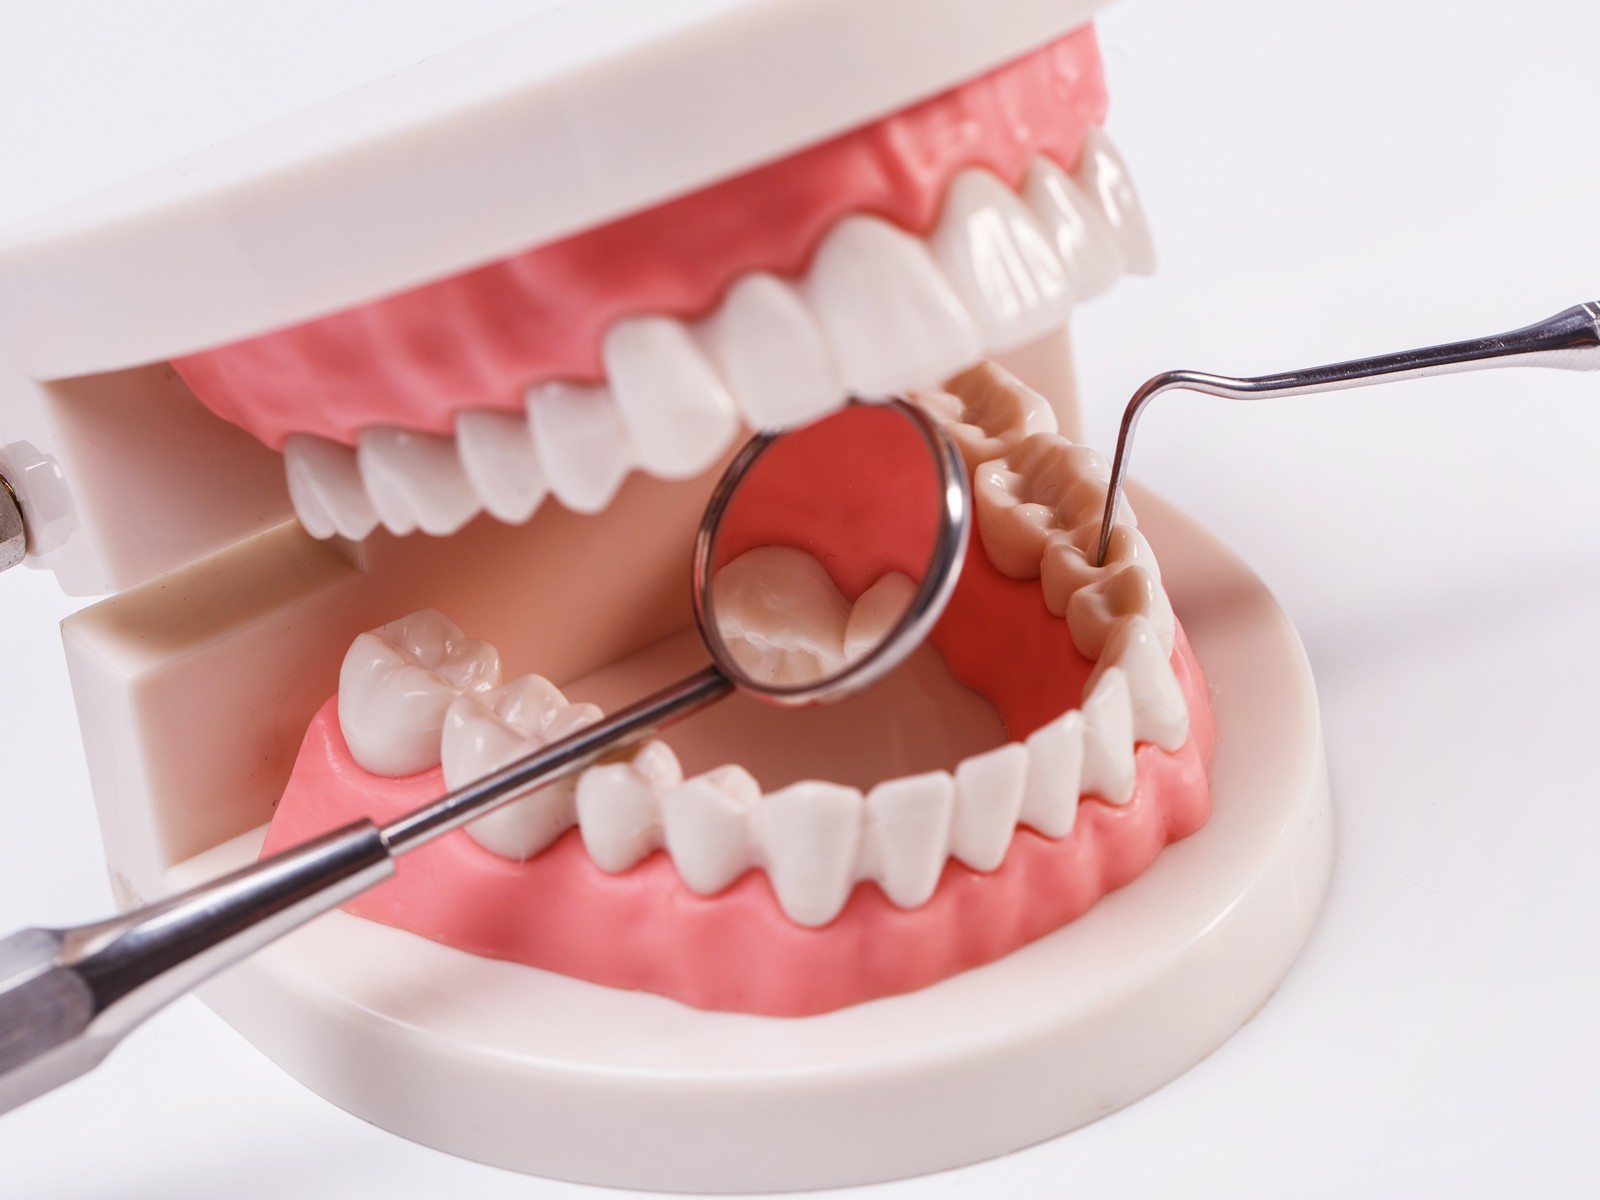 What is comprehensive dental care?